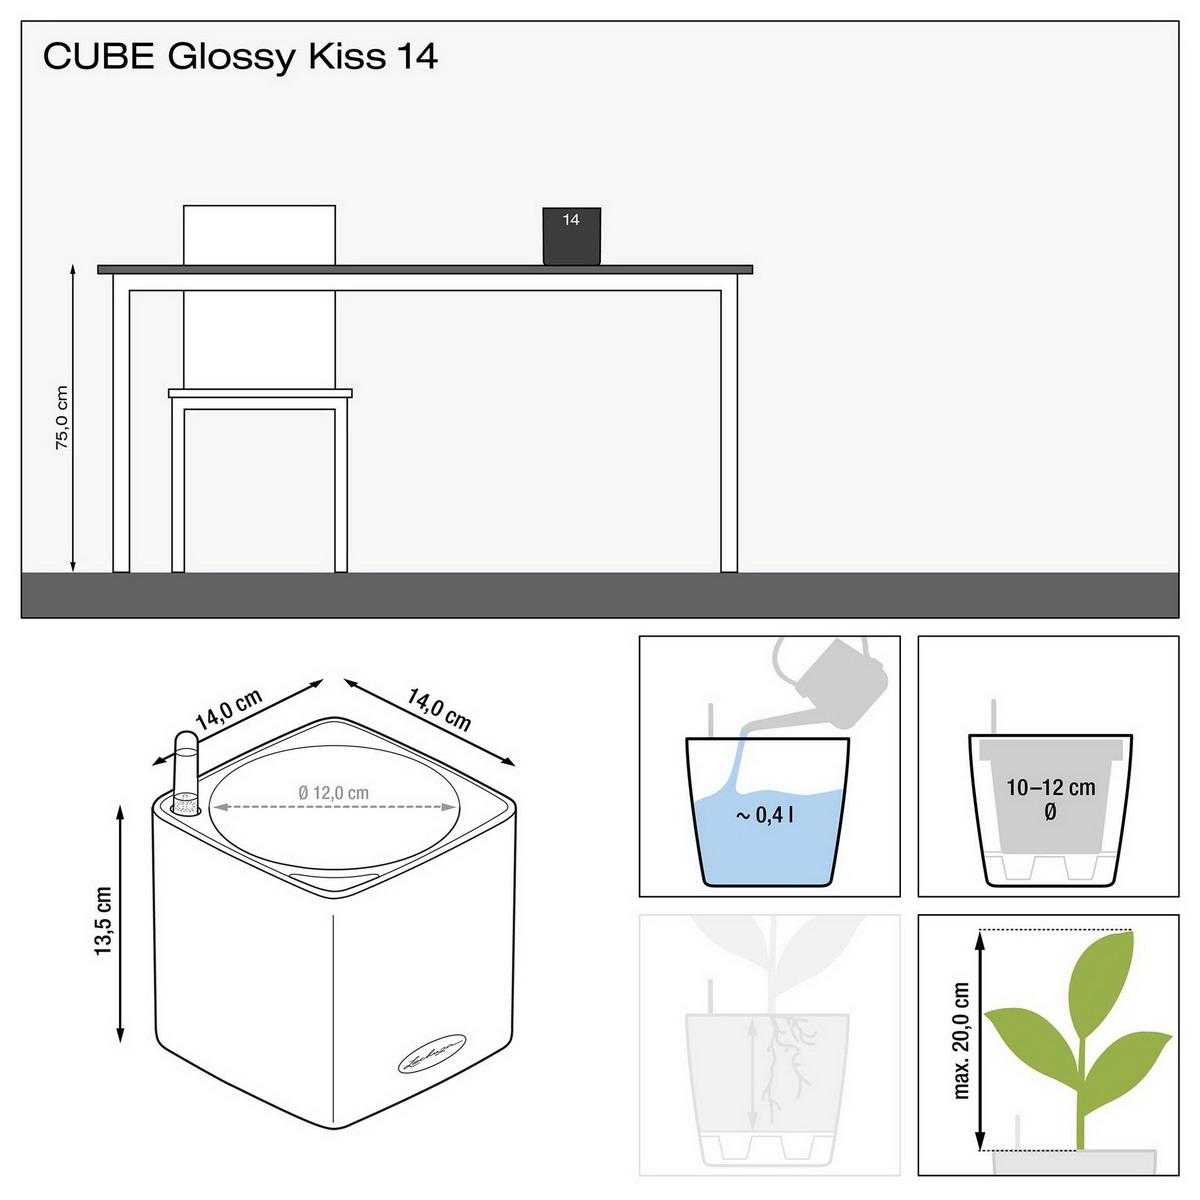 LECHUZA CUBE Glossy Kiss 14 Cashmere Cream Highgloss Glitter Poly Resin Table Self-watering Planter with Water Level Indicator H14 L14 W14 cm, 1.4L - citiplants.com